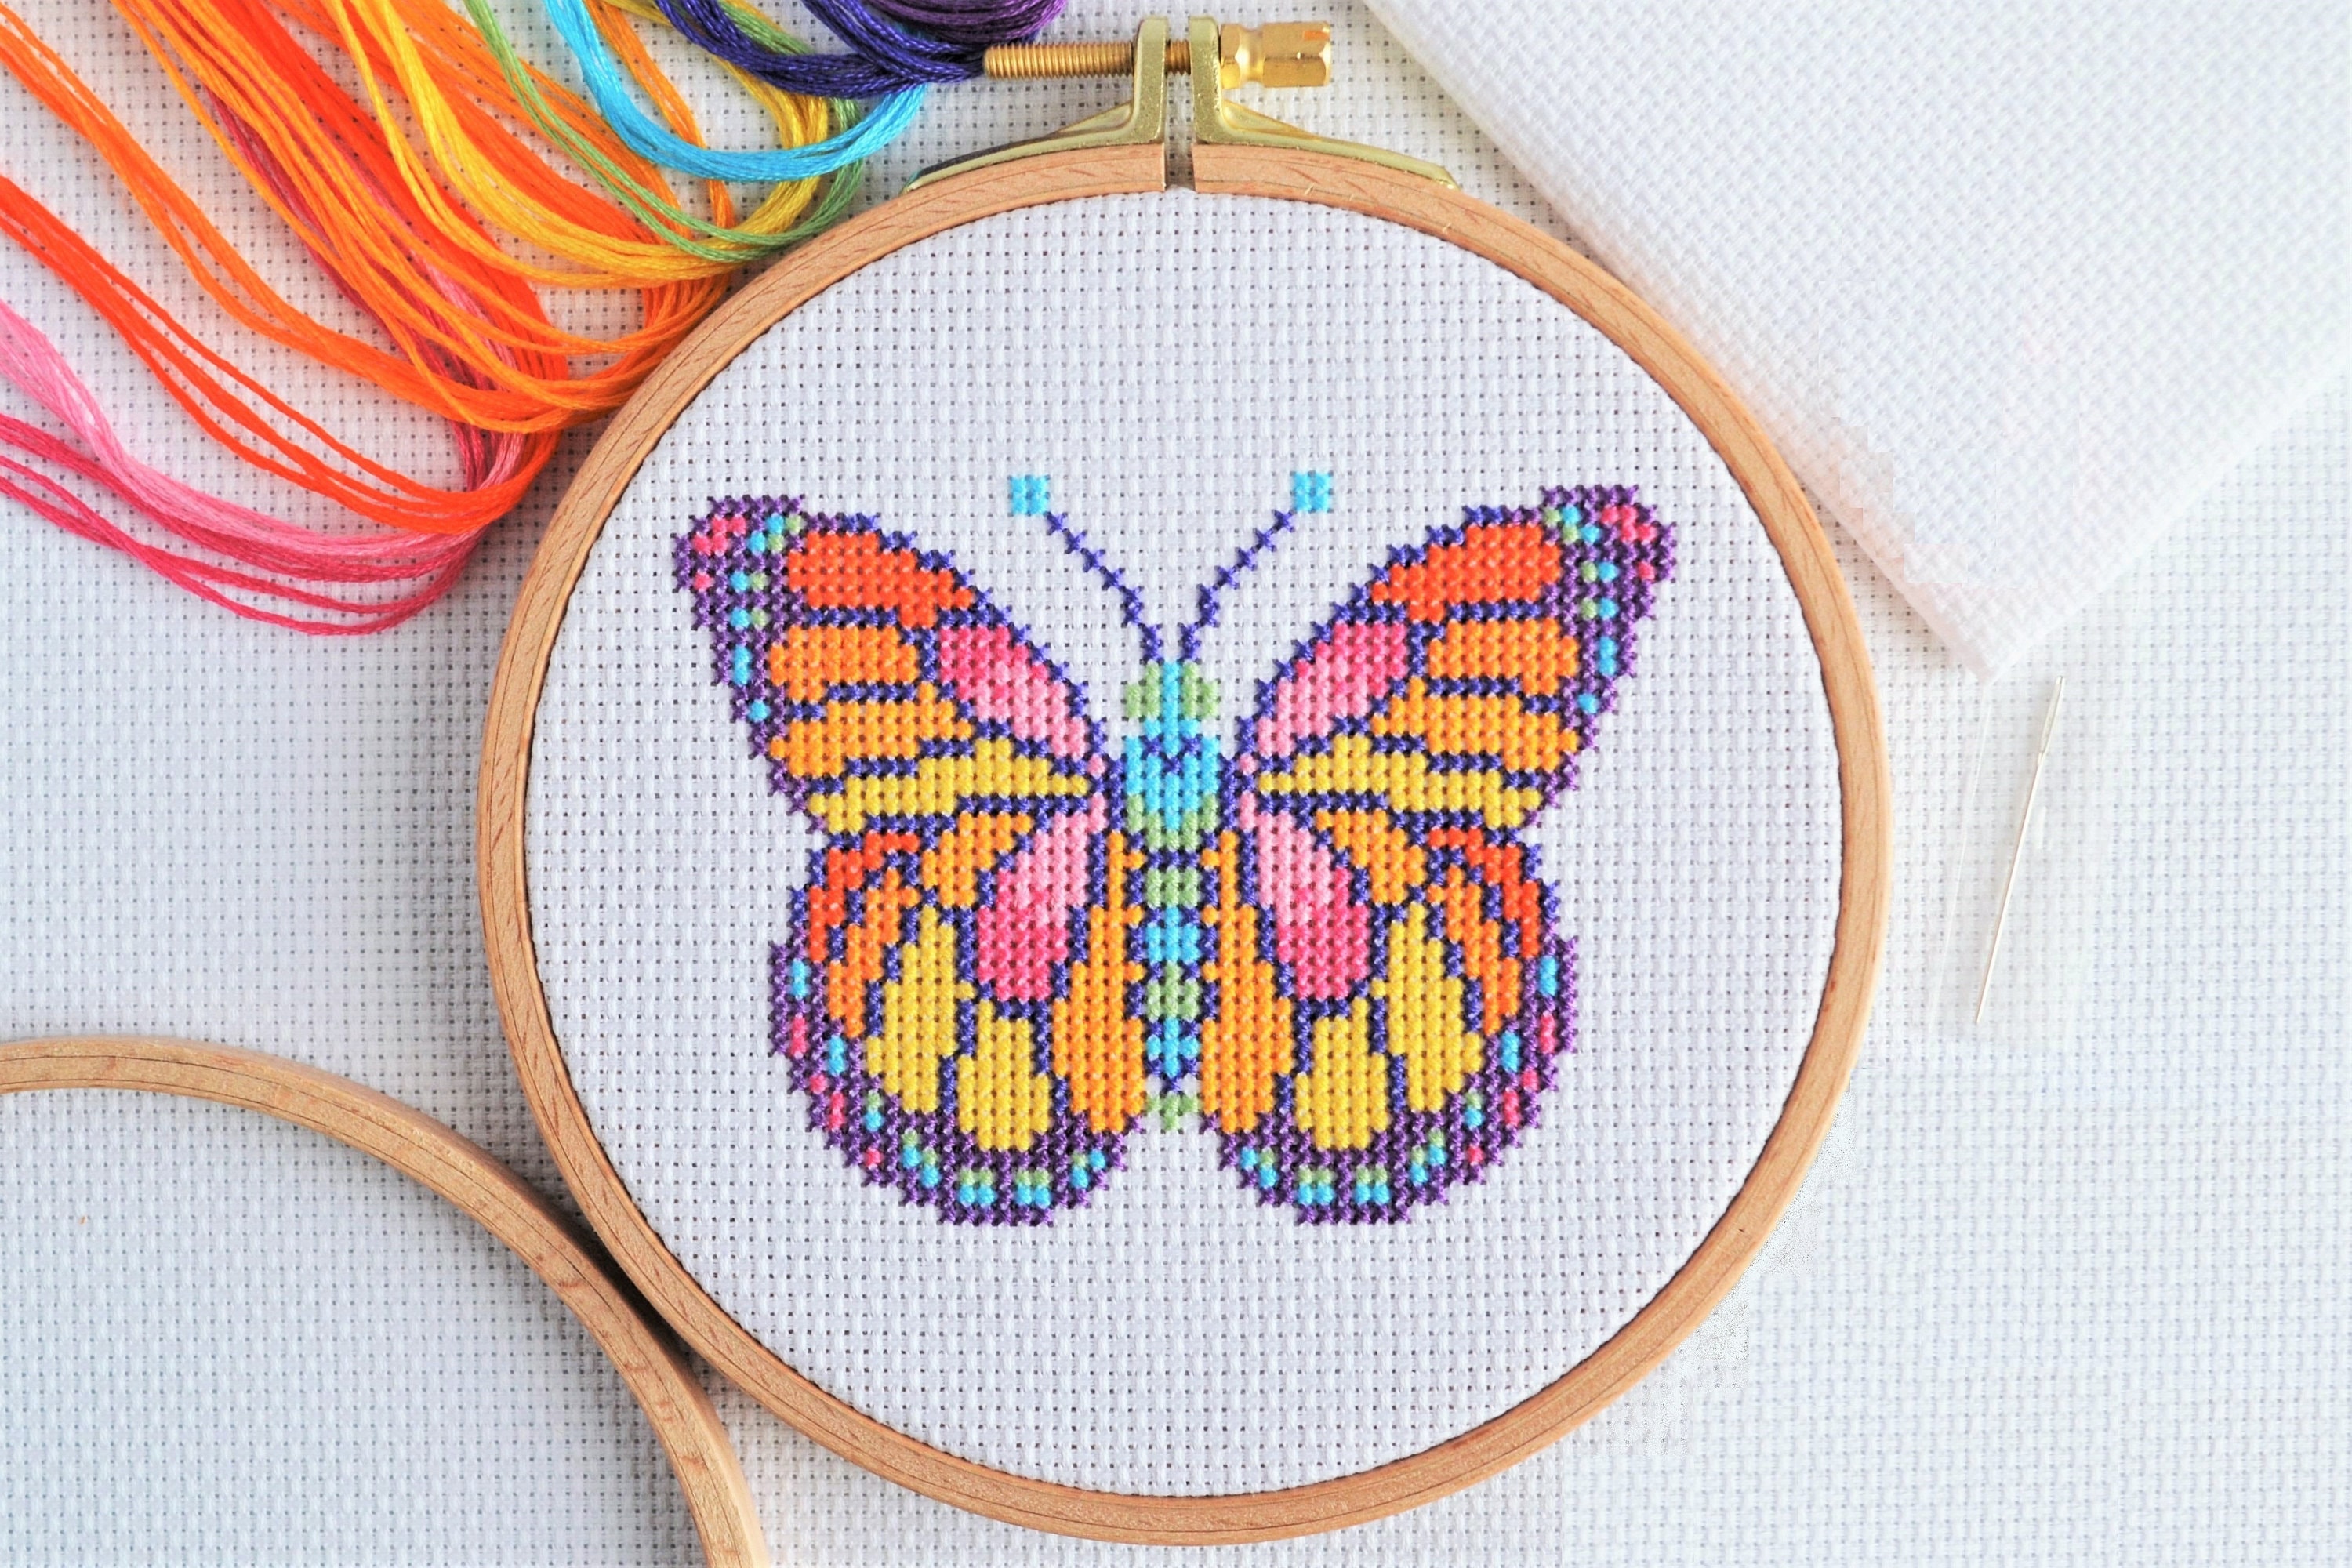 How to Make Cross Stitch Ornaments, Cushions and Wall Hangings -  Caterpillar Cross Stitch